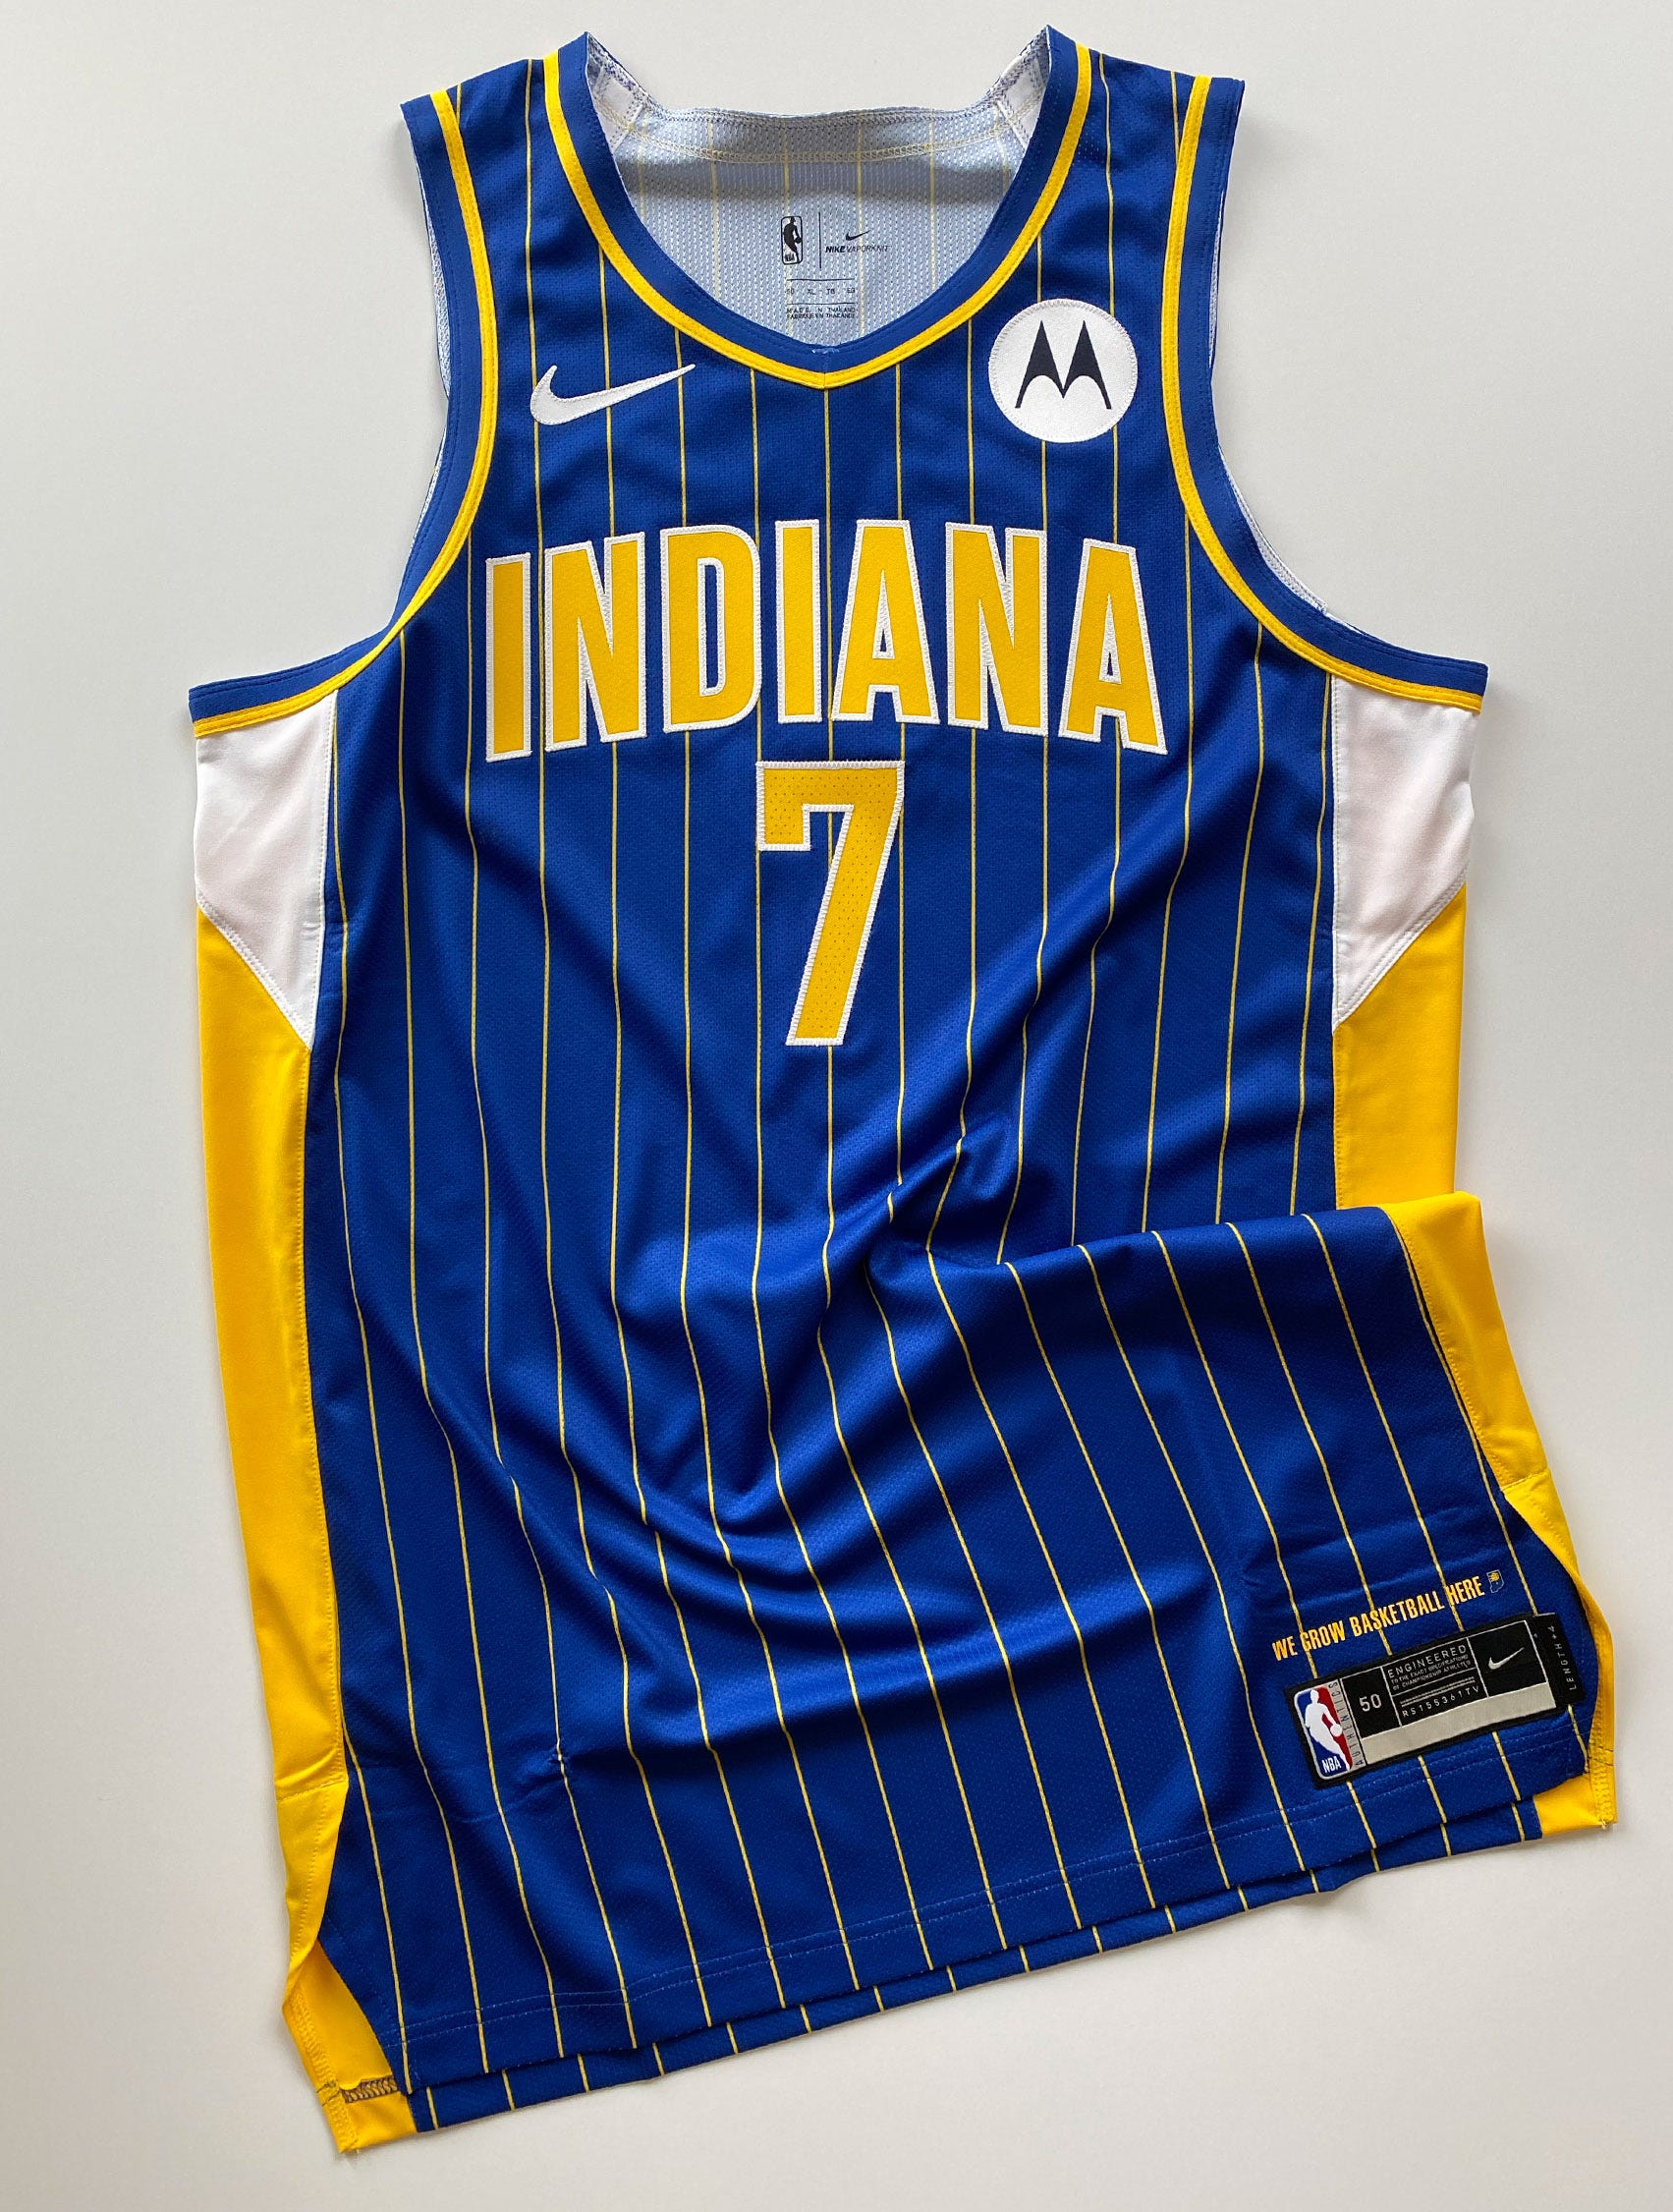 pacers city jersey 2019